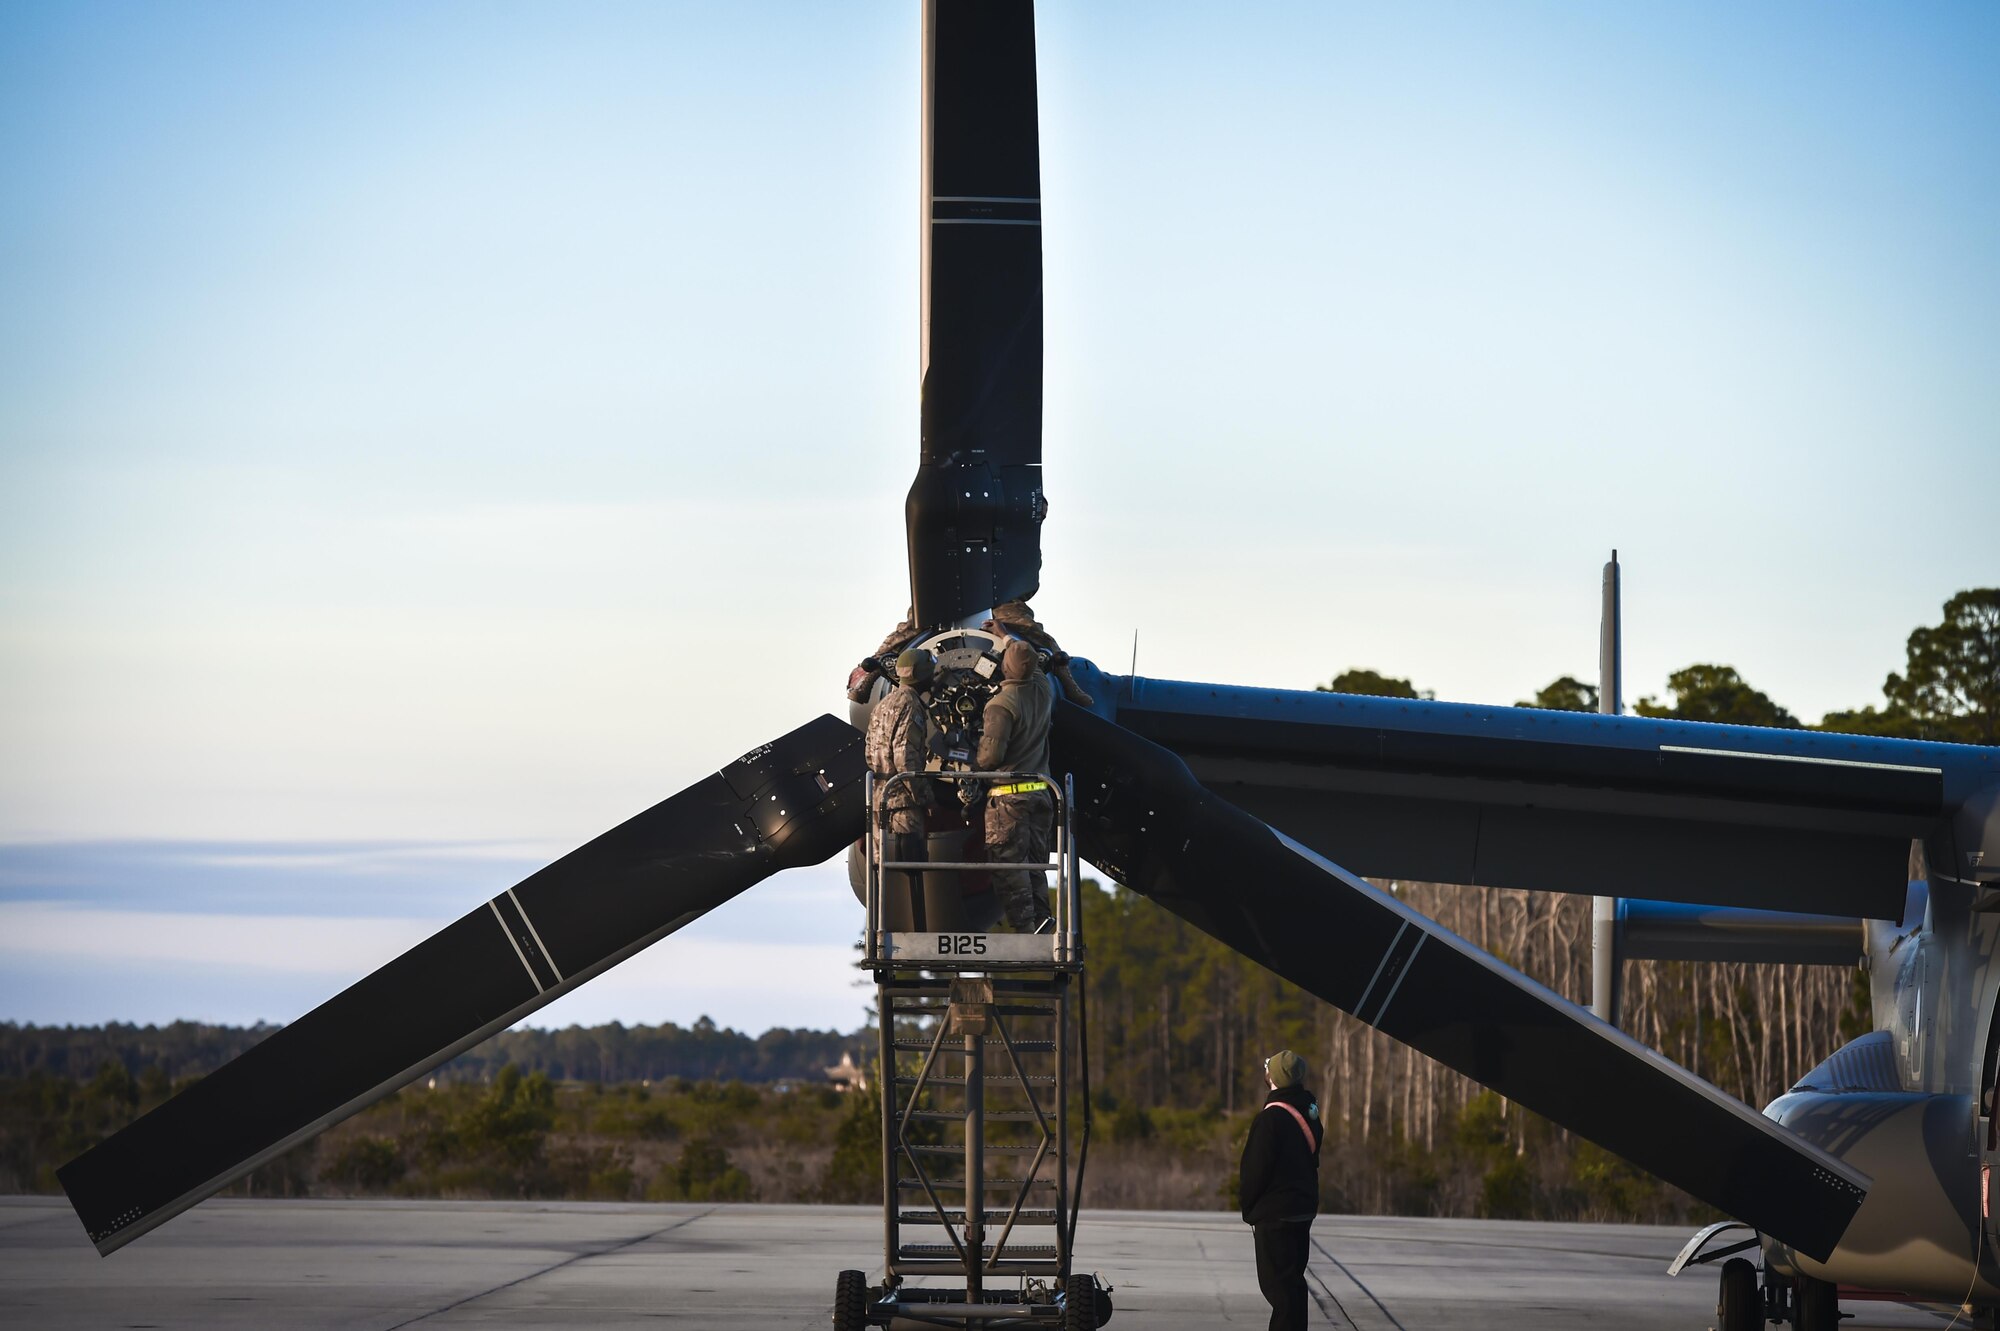 Airmen assigned to the 801st Special Operations Aircraft Maintenance Squadron perform routine maintenance on a CV-22 Osprey tiltrotor aircraft at Hurlburt Field, Fla., Jan. 9, 2017. The 801st SOAMXS provides regular maintenance for the Osprey assigned to the 8th Special Operations Squadron. (U.S. Air Force photo by Staff Sgt. Christopher Callaway)